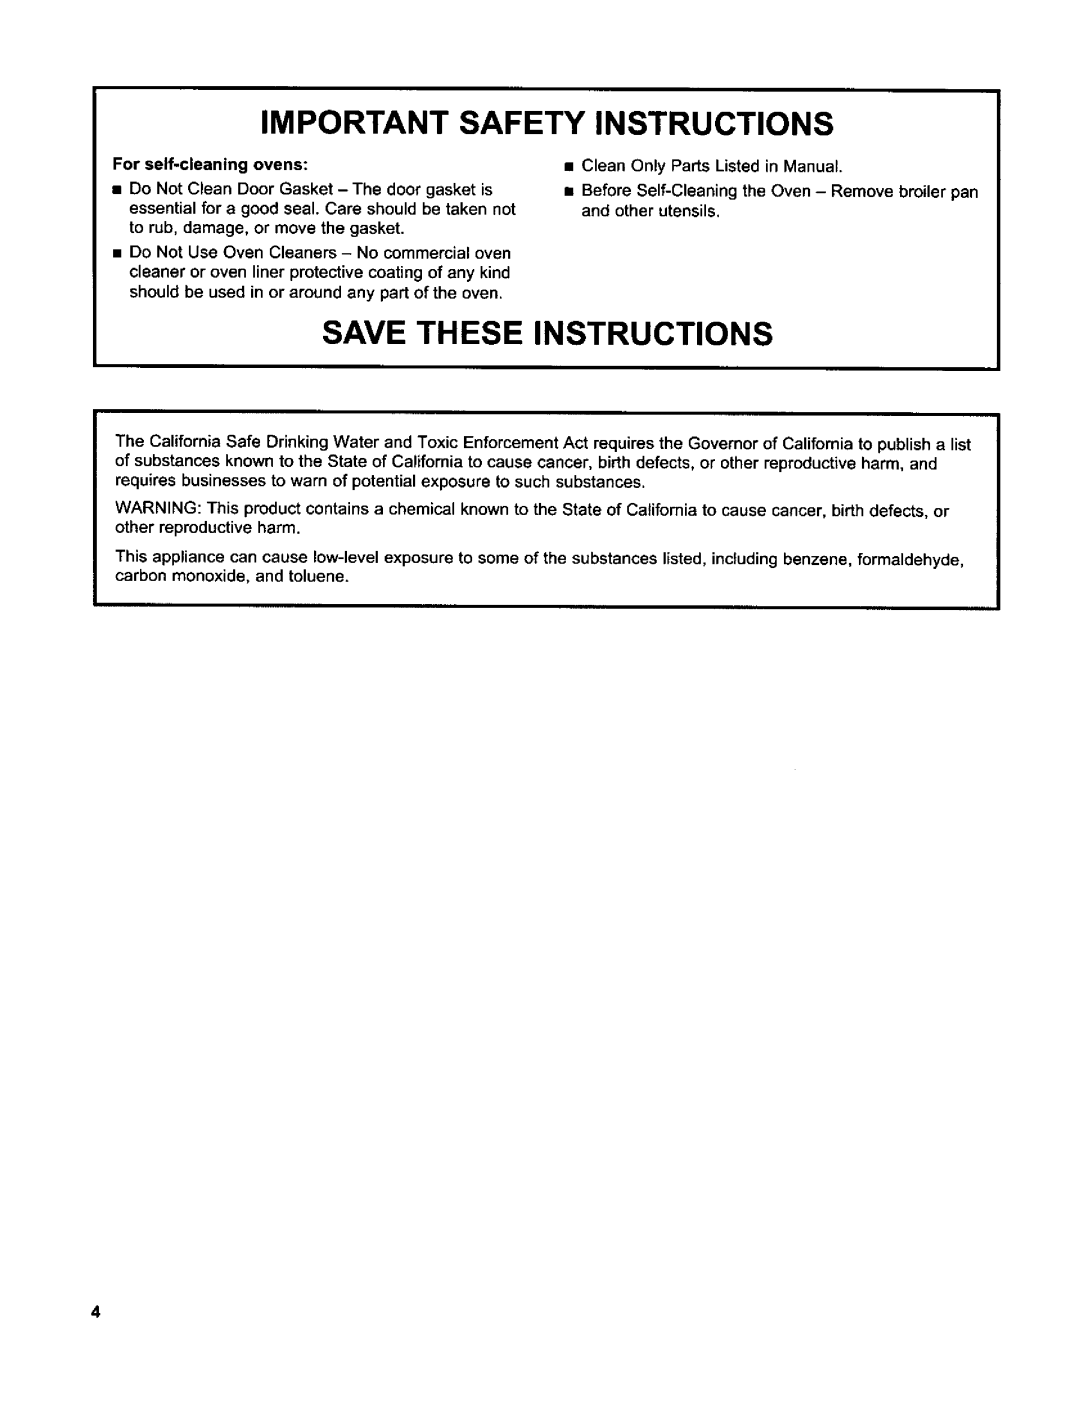 Whirlpool RBD306 manual Save Theseinstructions, Important Safety, Instructions 